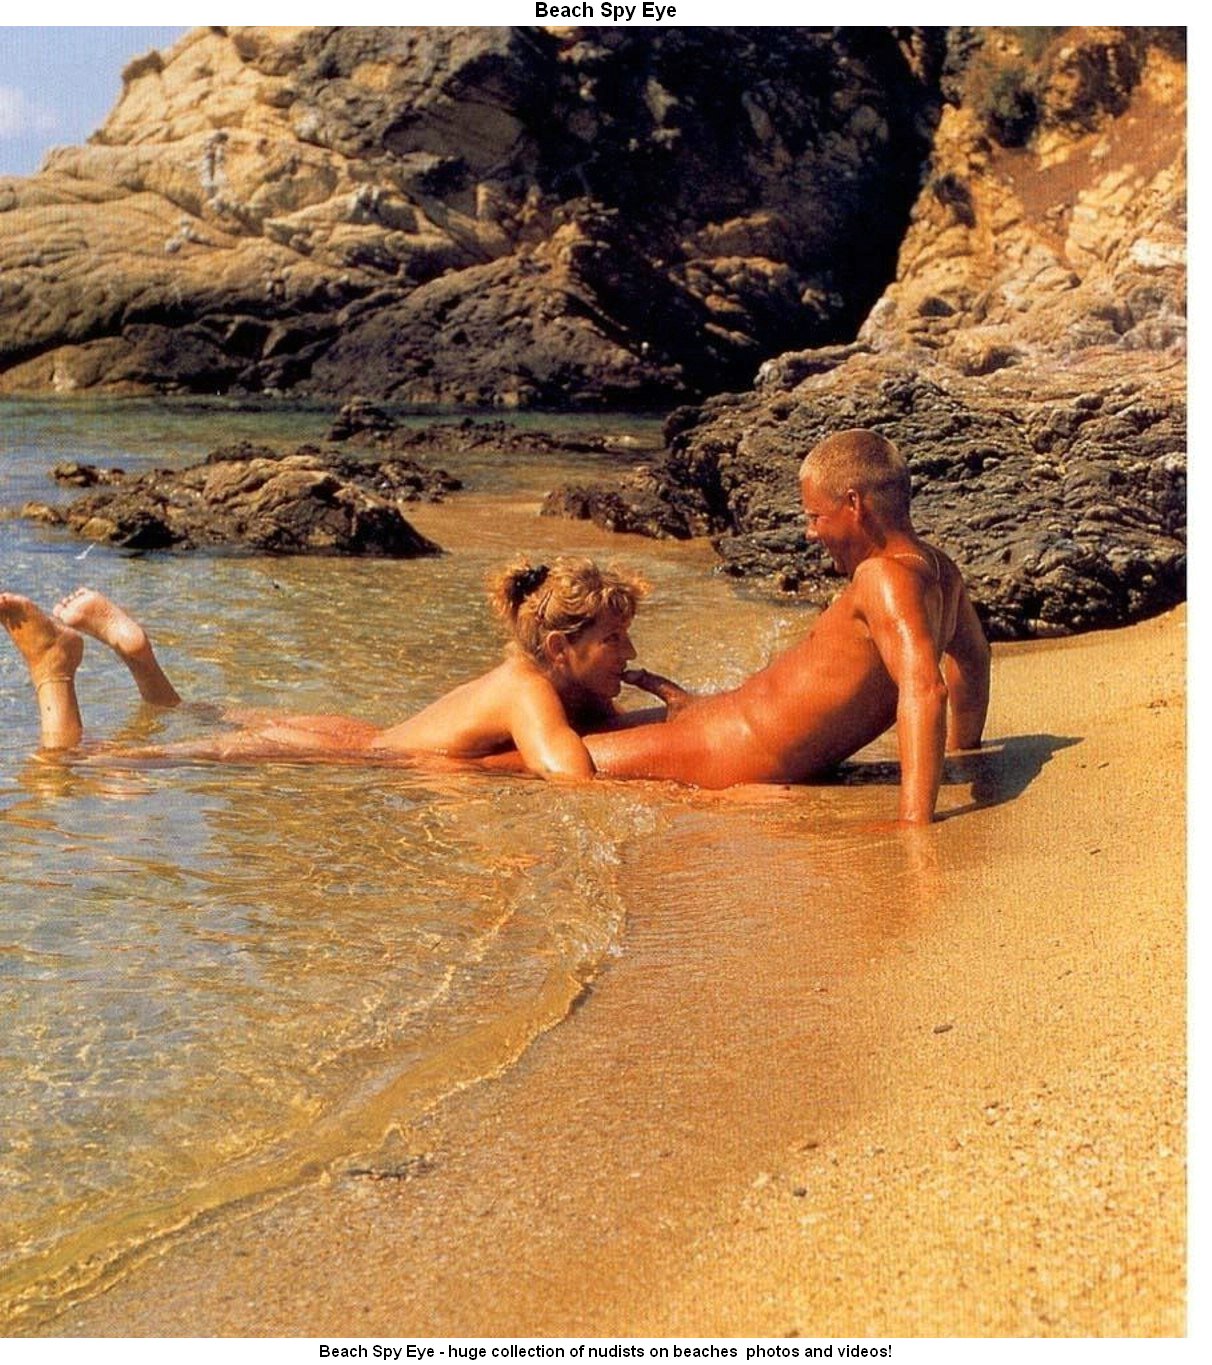 Nude Beaches Pics Unshod on beaches - clear the way nudists wants.. Image 3